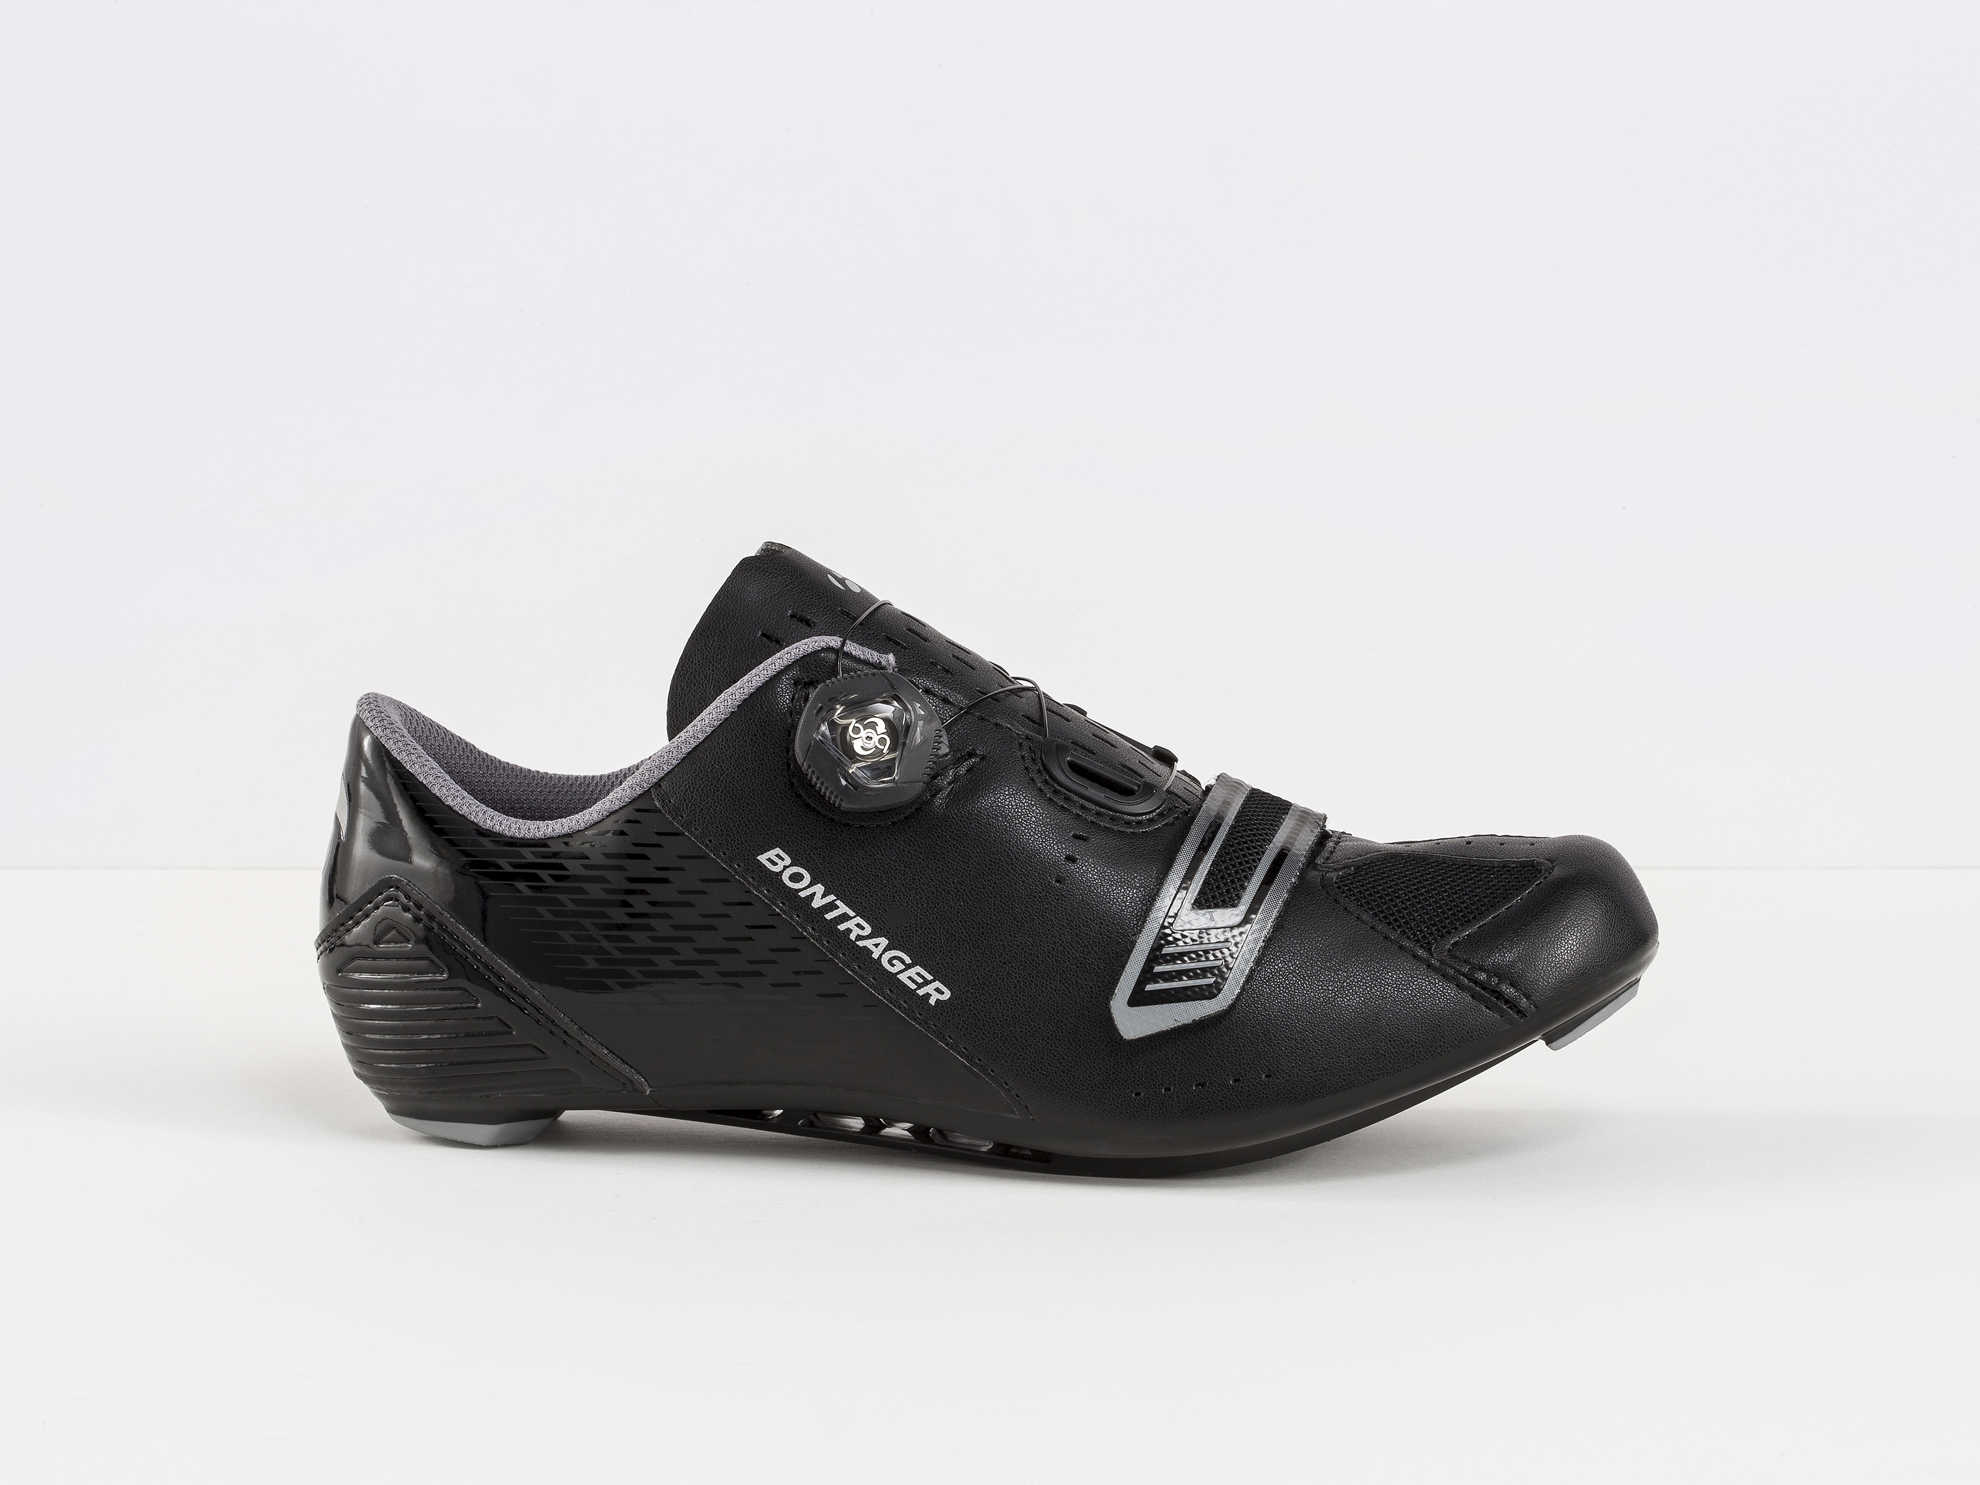 Bontrager Specter Road Shoe | Cycling shoes | Cycling apparel | Apparel ...